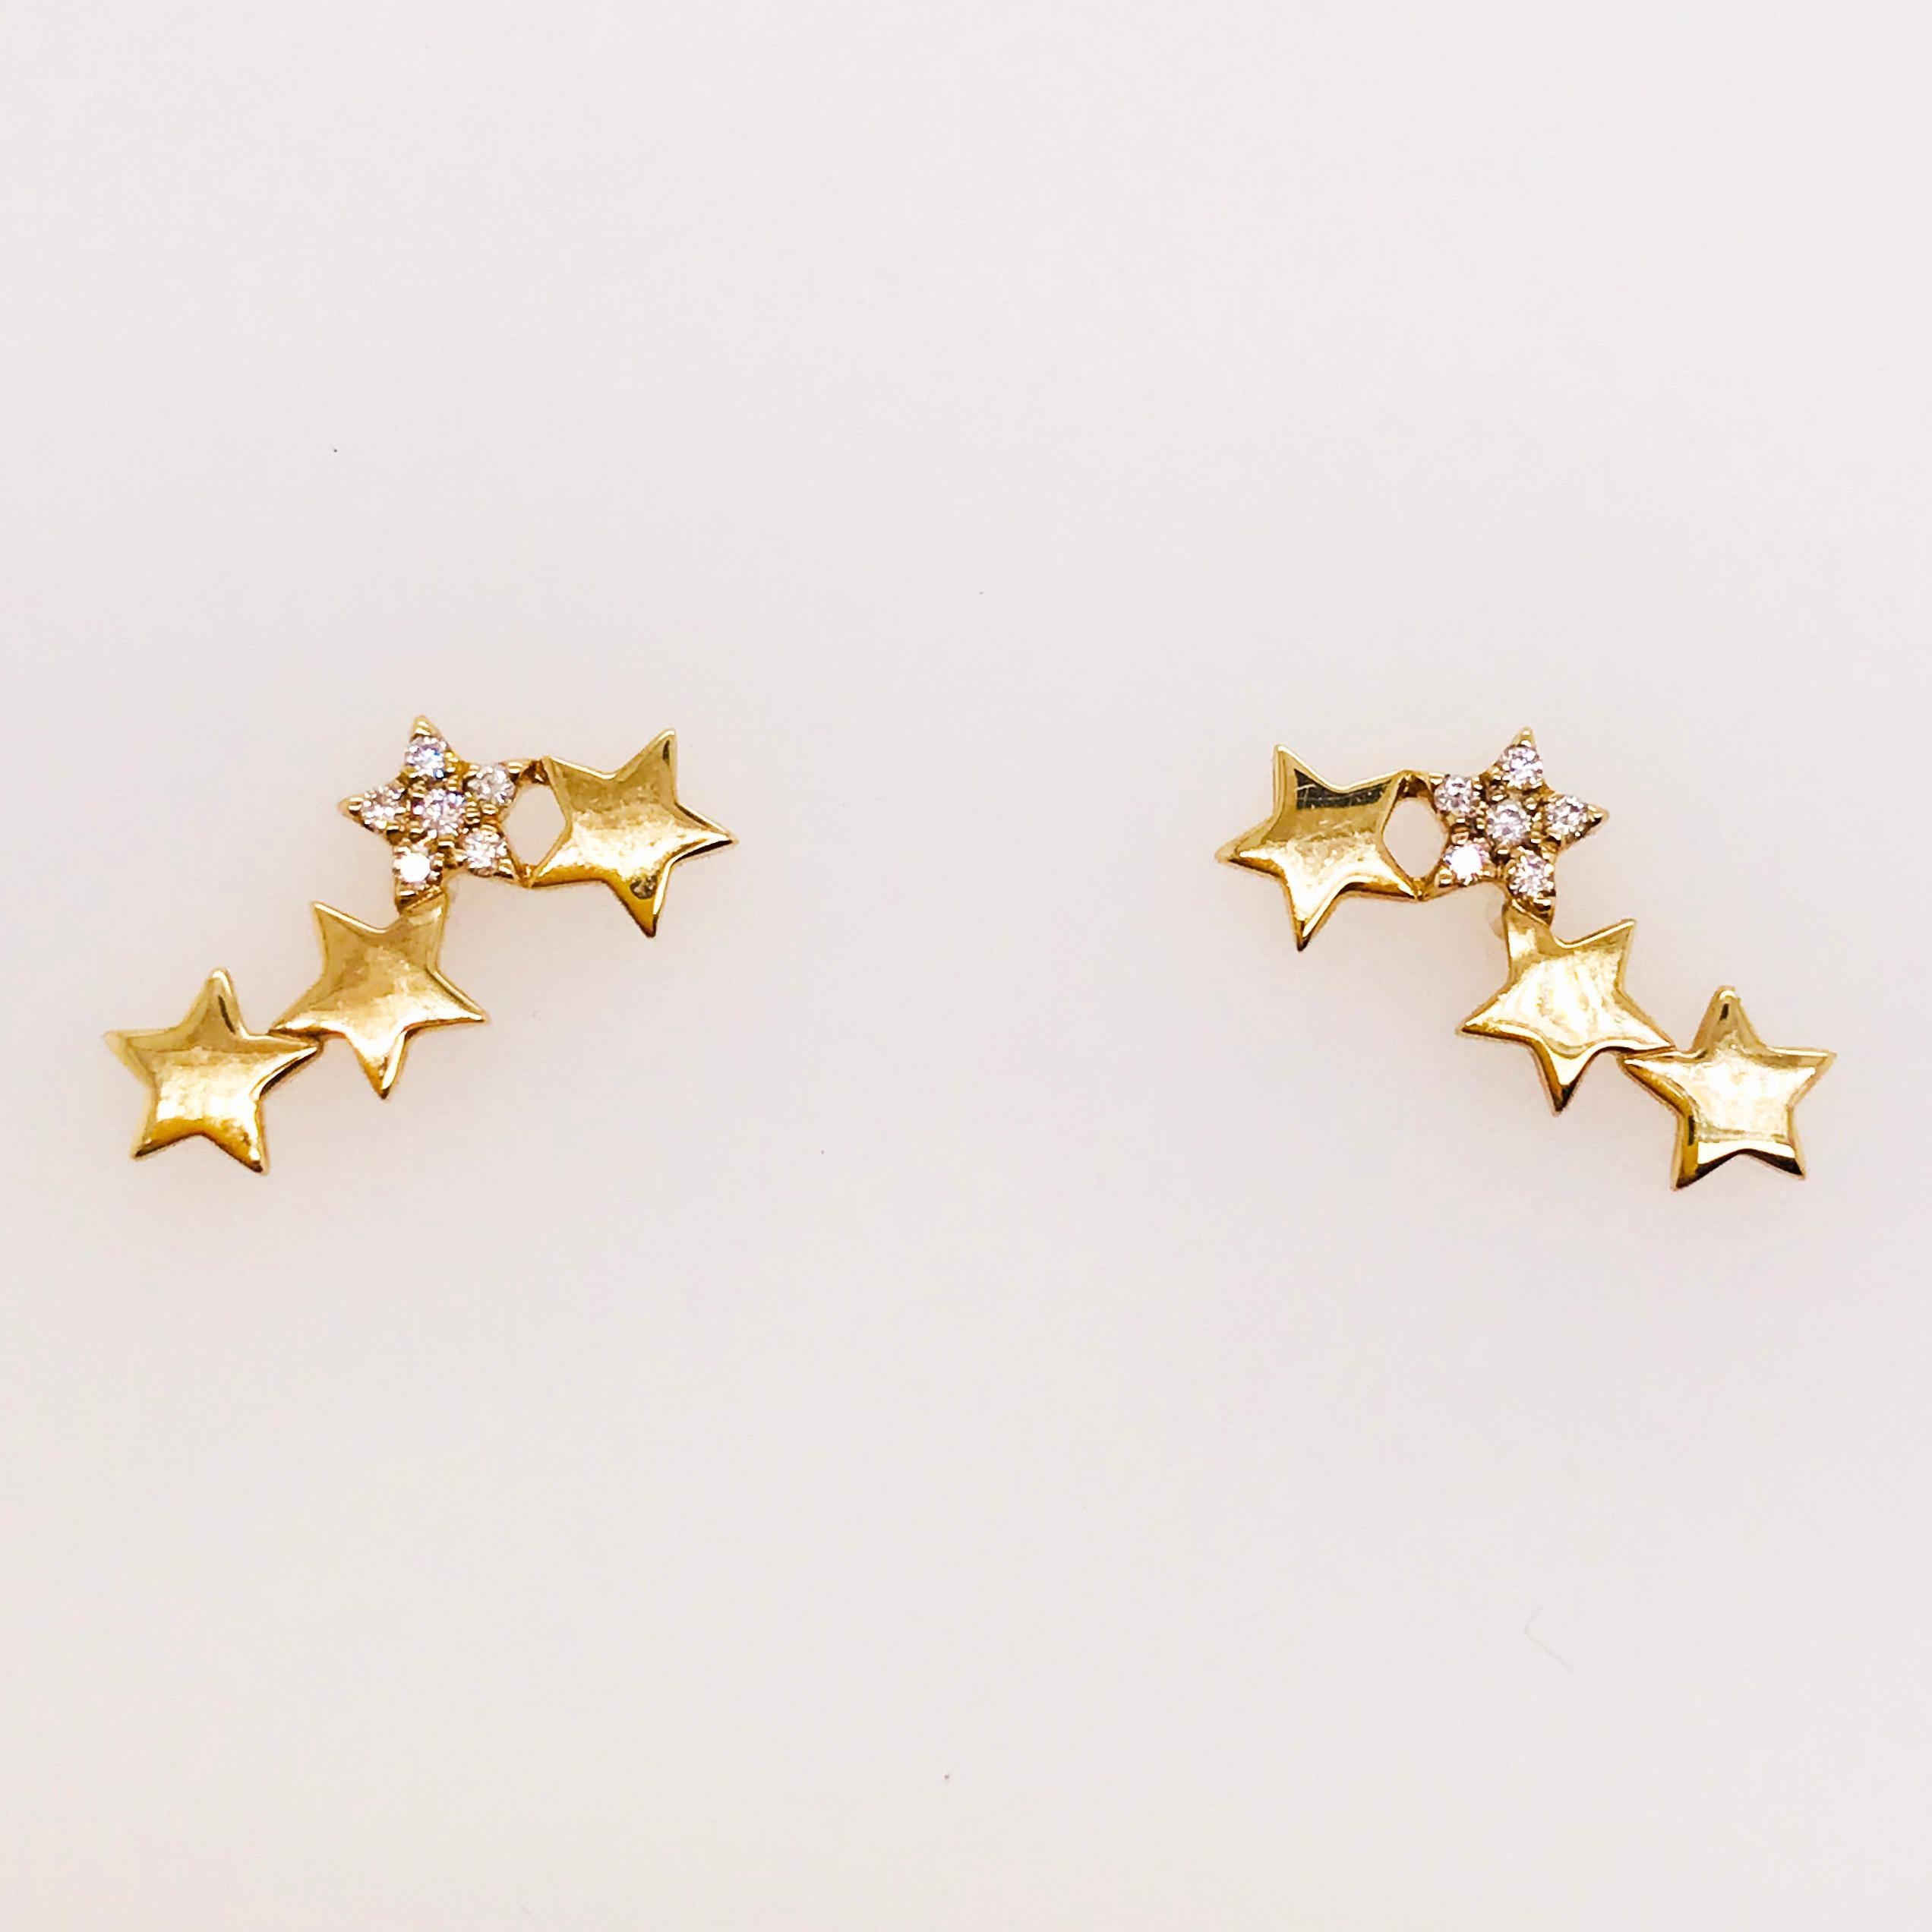 These diamond earrings are the newest trend! Cute, dainty, sparkly stars! These star earrings are adorable and shiny with 6 round brilliant diamonds making one of the four stars shine brightest in each earring! These are a 14k yellow gold